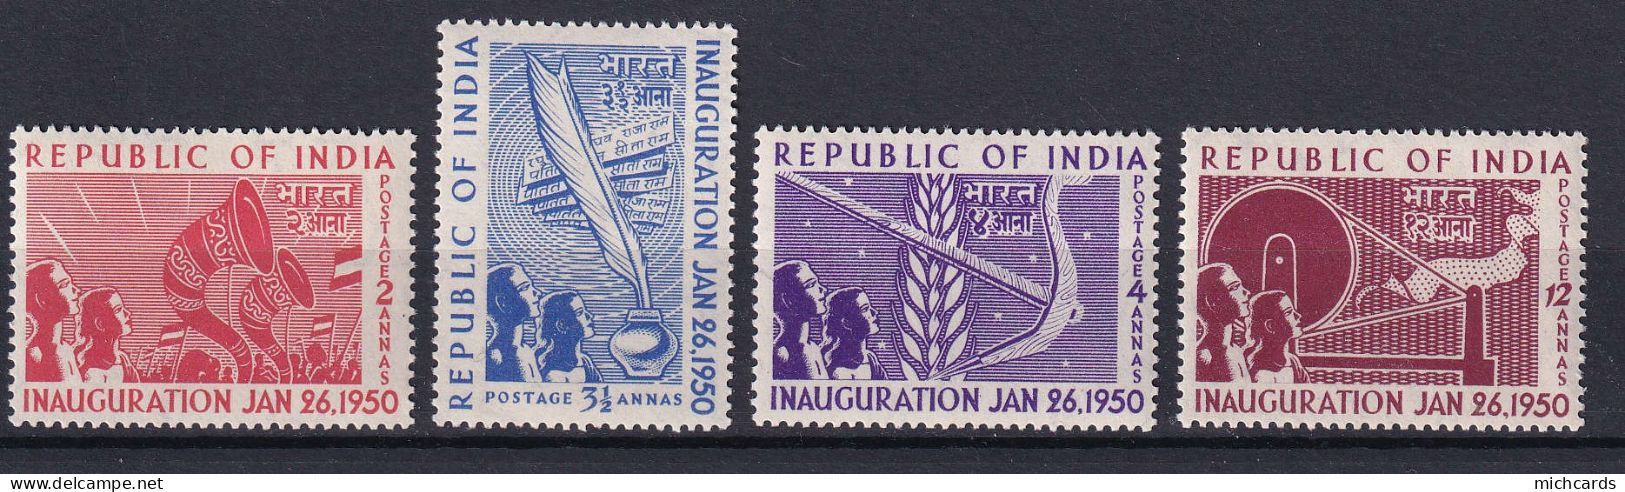 185 INDE 1951 - Yvert 27/30 - Trompette Plume Ble Rouet  - Neuf ** (MNH) Sans Charniere - Unused Stamps